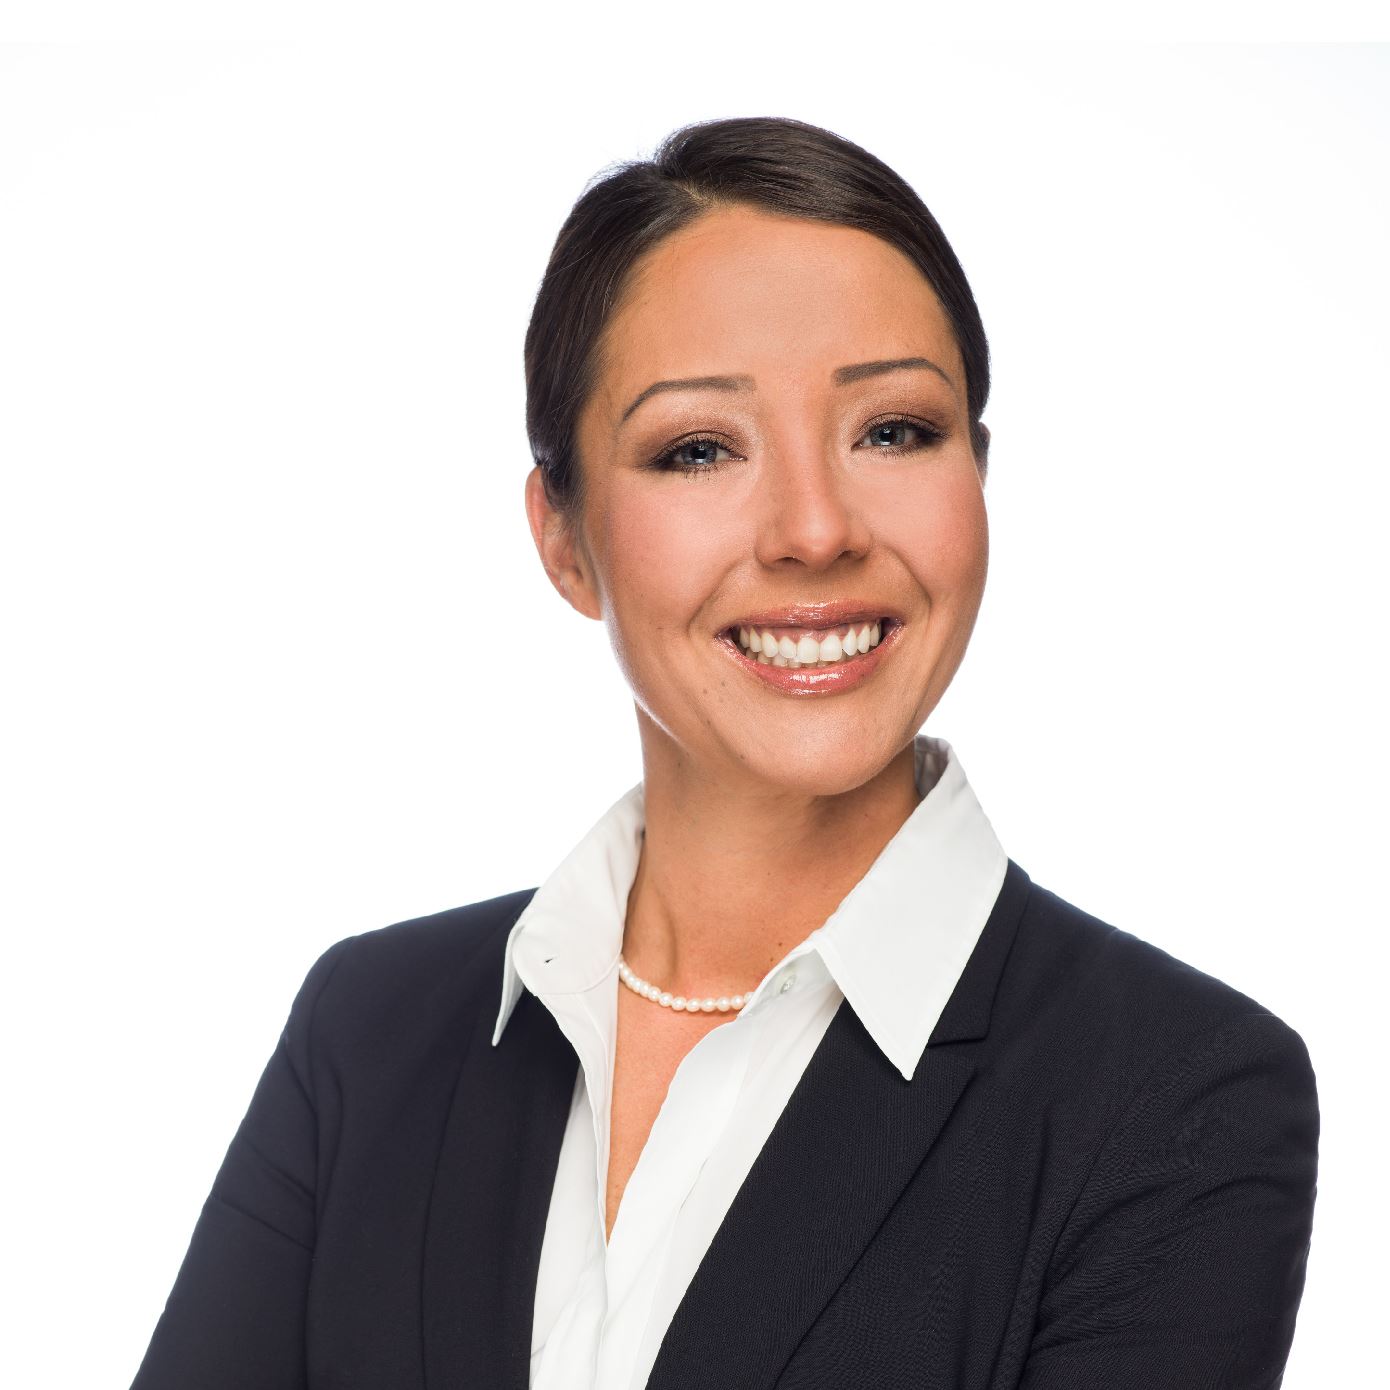 Sheena Collum in a black blazer in front of a white background